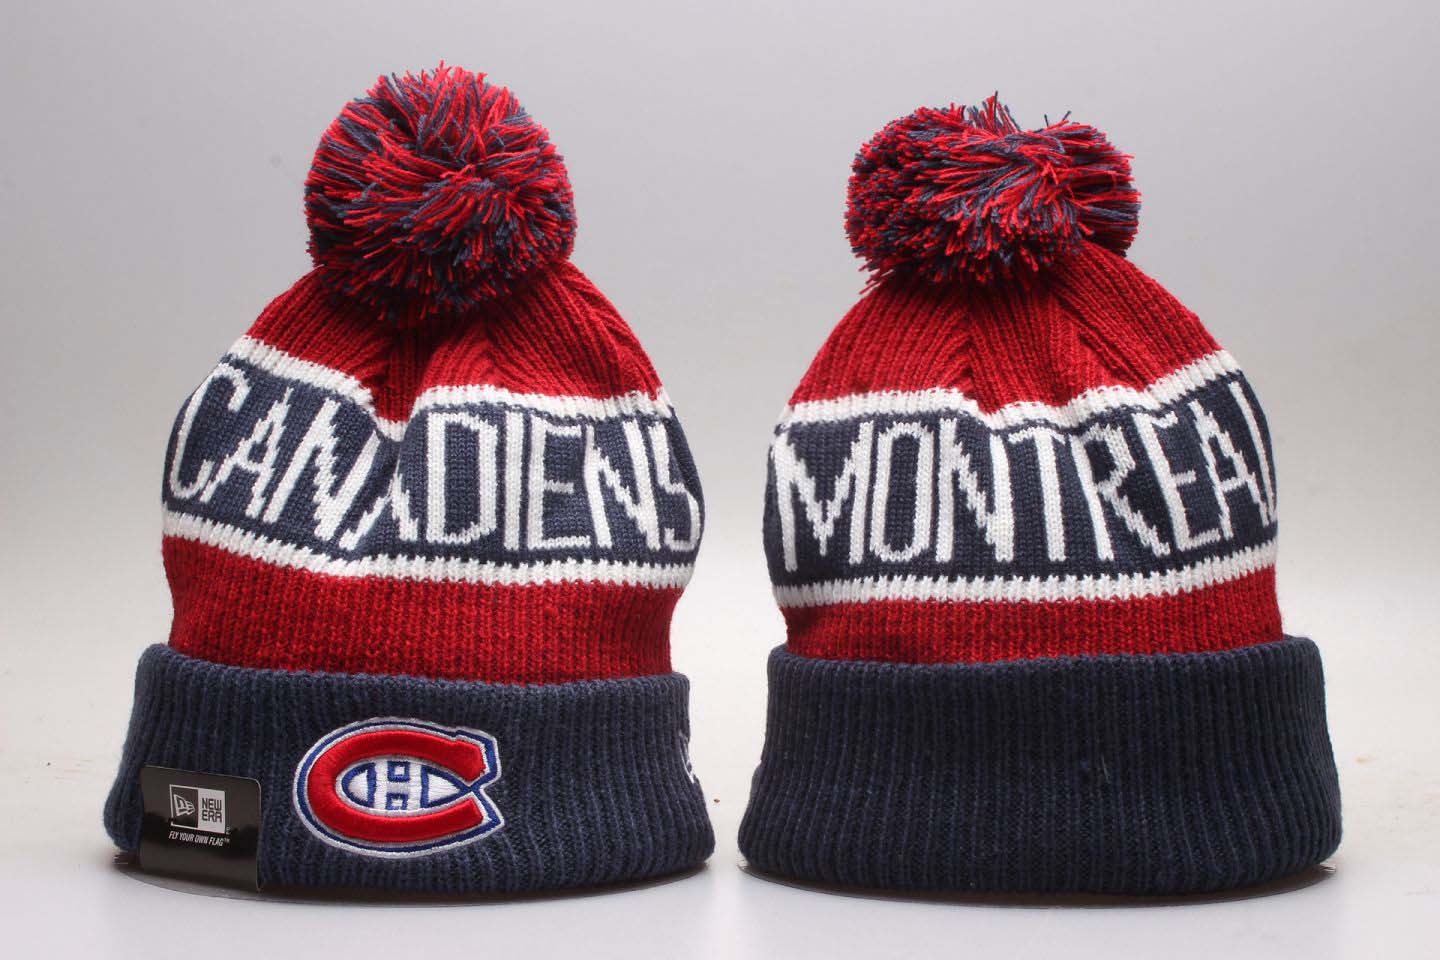 2020 NHL Montreal Canadiens Beanies 19